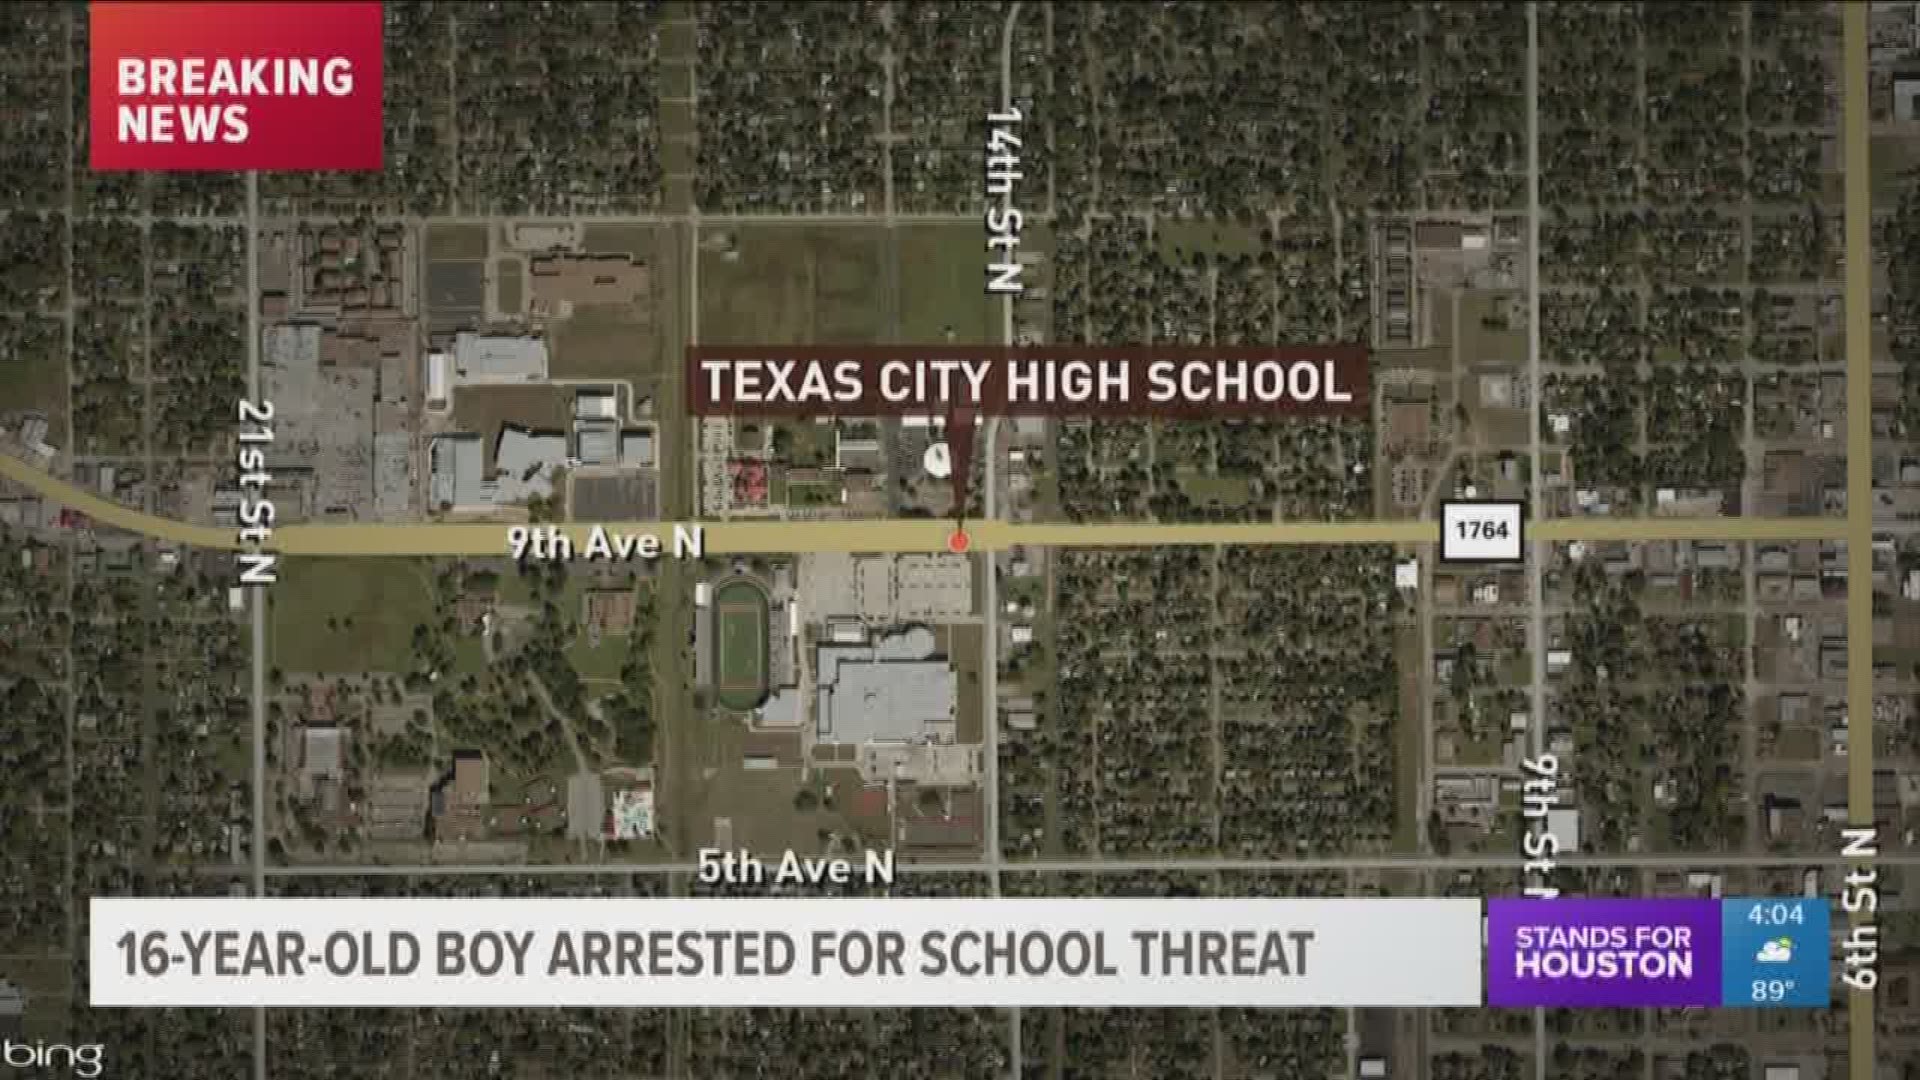 A Texas City High School student was arrested Monday in connection to an alleged threat made last week on a bathroom wall at the school.